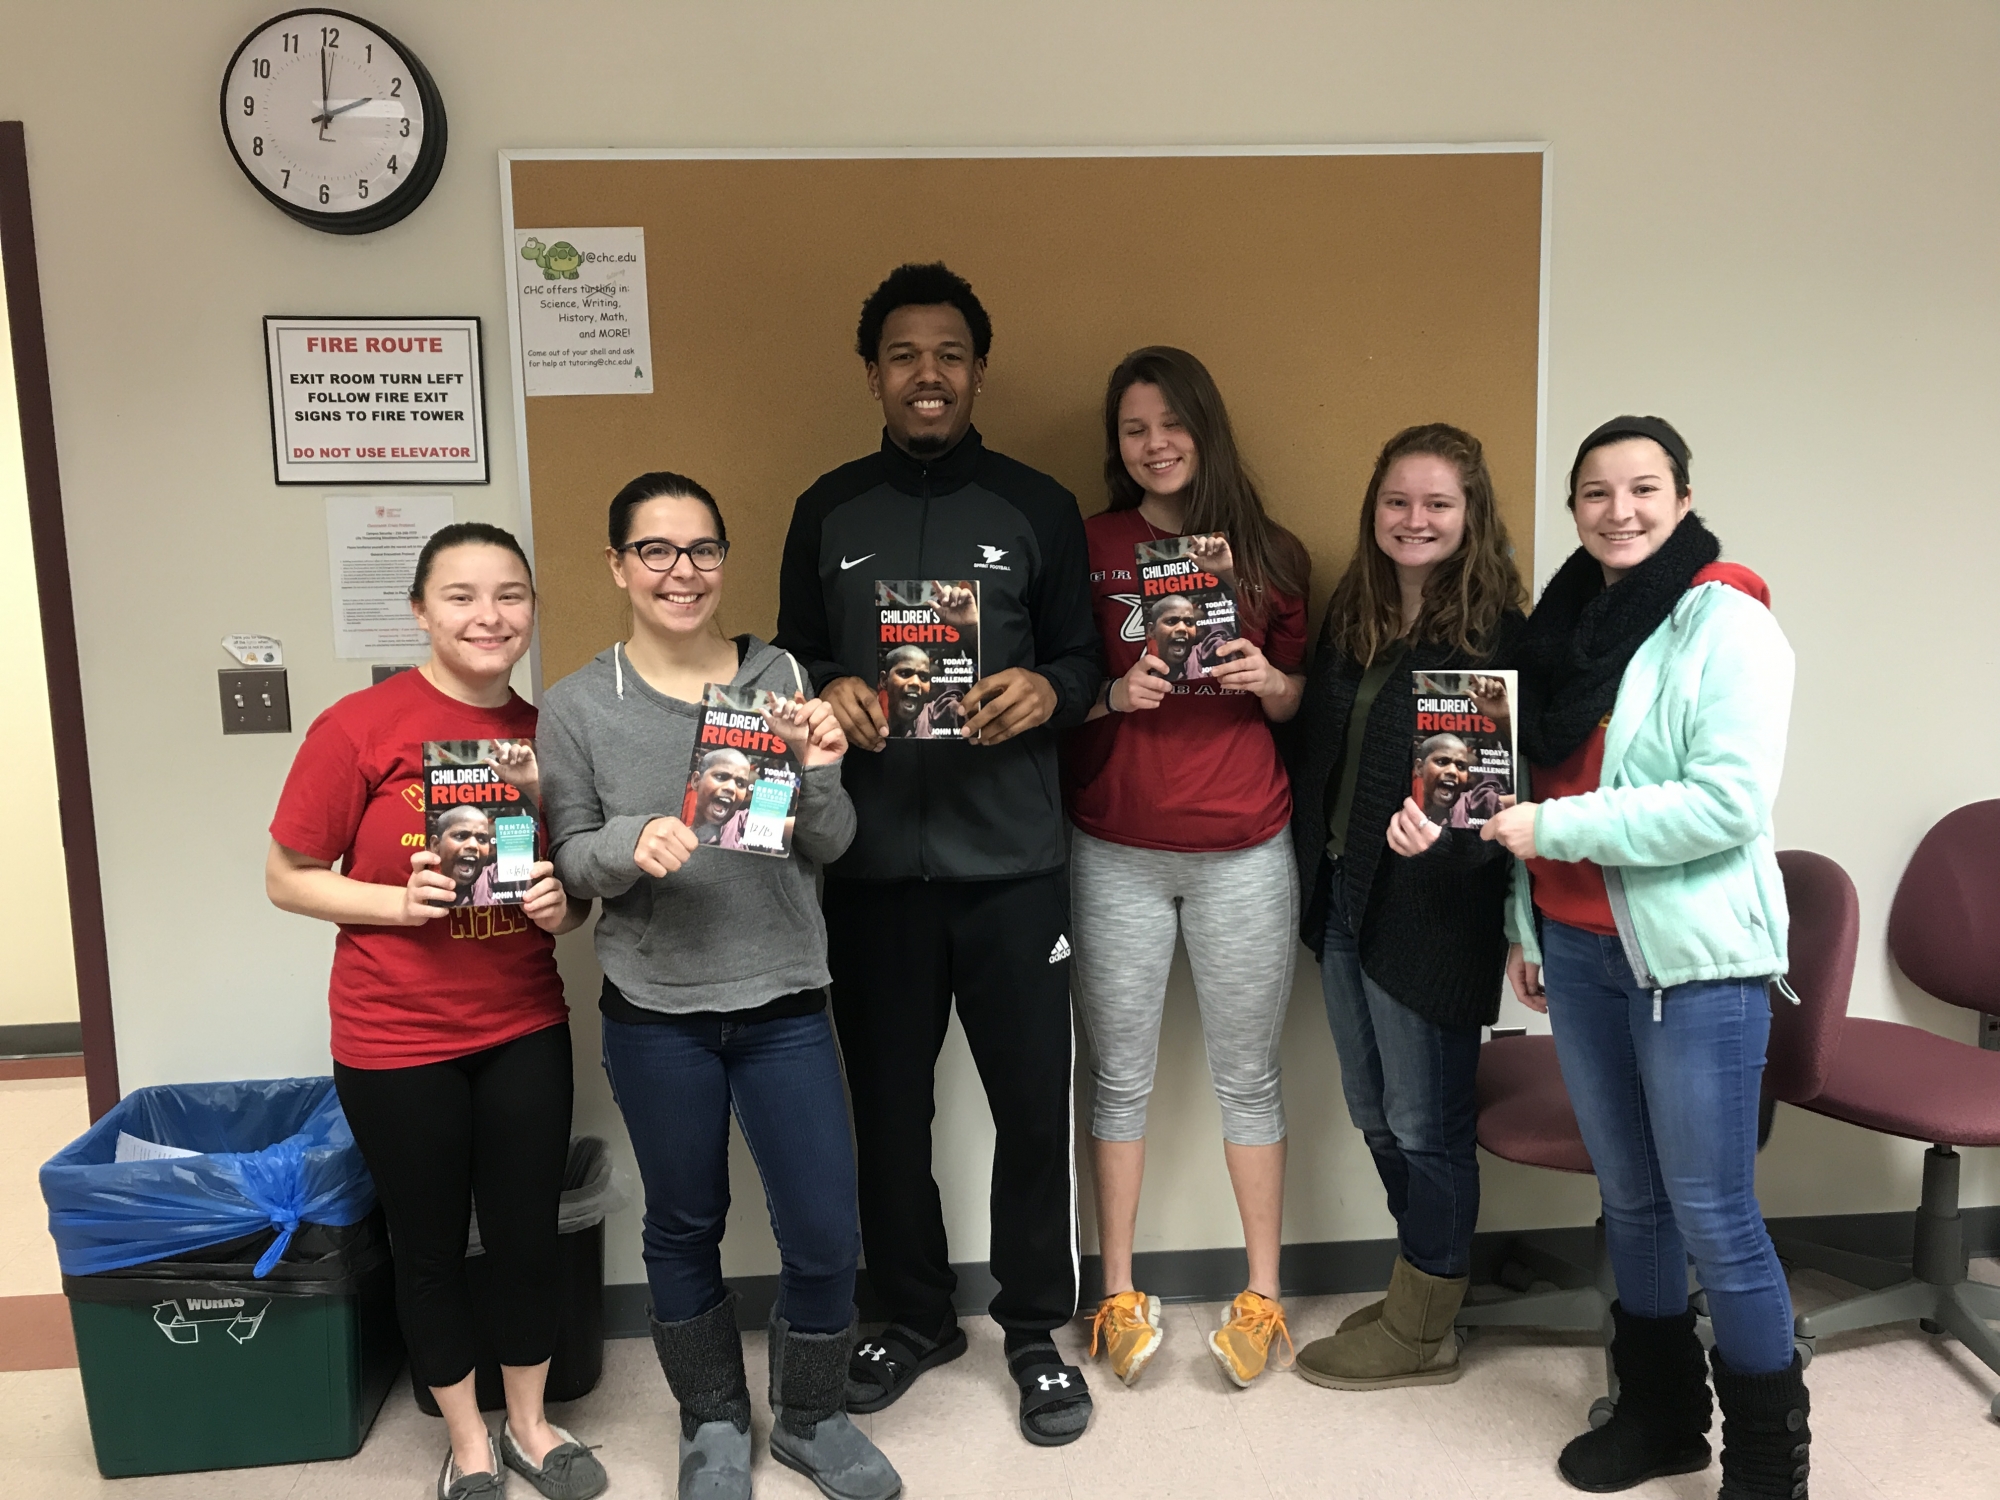 Students in Sara Kitchen's class pose with copies of John Wall's book after he met with the class to discuss his work.